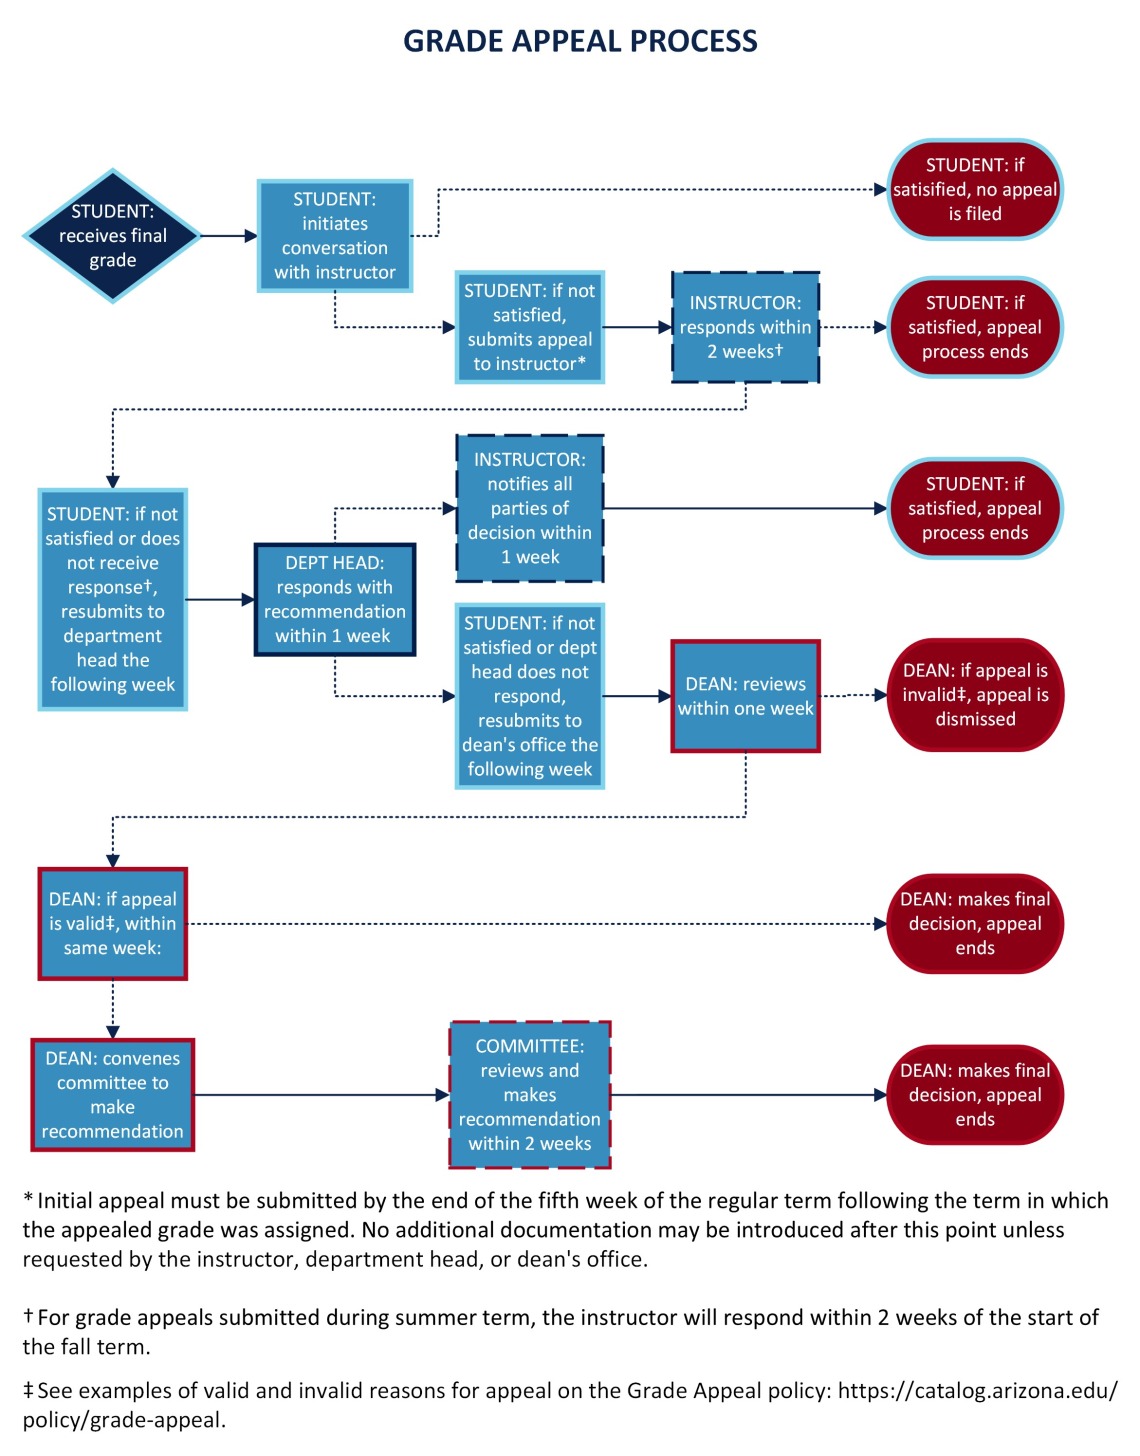 grade appeal flow chart - same steps as listed on page